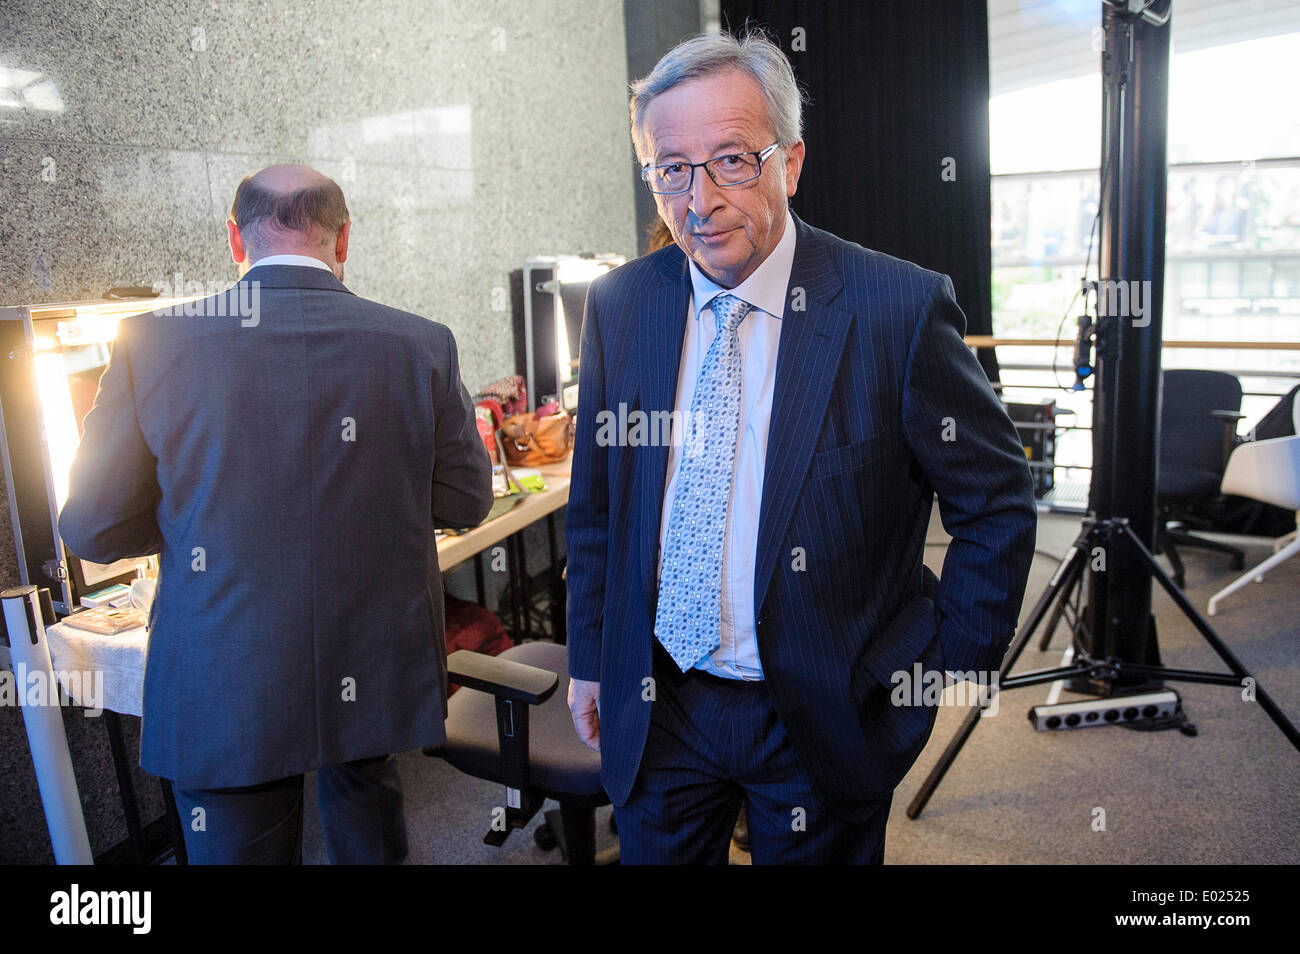 Brussels, Bxl, Belgium. 29th Apr, 2014. Jean-Claude Juncker, top candidate for European People's Party (EPP) ahead of Euranet's 'Big Crunch' Presidential debate at the EU parliament in Brussels, Belgium on 29.04.2014 The four top candidates for the presidency of the European Commission - Jean-Claude Juncker, Ska Keller, Martin Schulz and Guy Verhofstadt - attend EU-wide debate organized by EuranetPlus and focused on the major election topics. by Wiktor Dabkowski Credit:  Wiktor Dabkowski/ZUMAPRESS.com/Alamy Live News Stock Photo